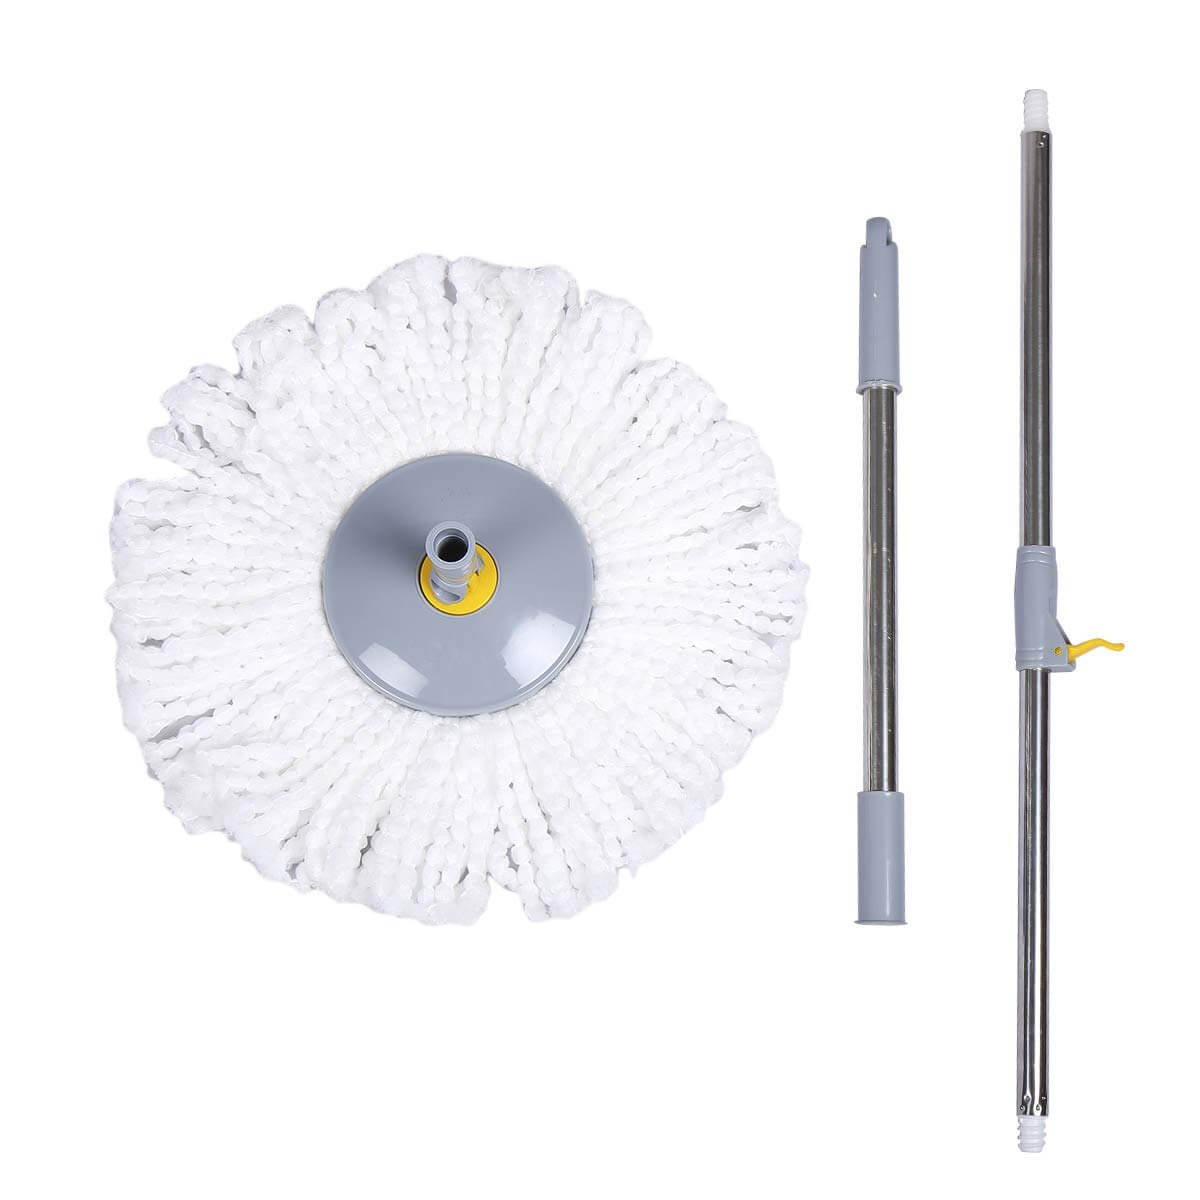 https://shoppingyatra.com/product_images/Esquire Elegant GREY 360° Spin Mop Set with Easy Wheels and Additional Refill1.jpg